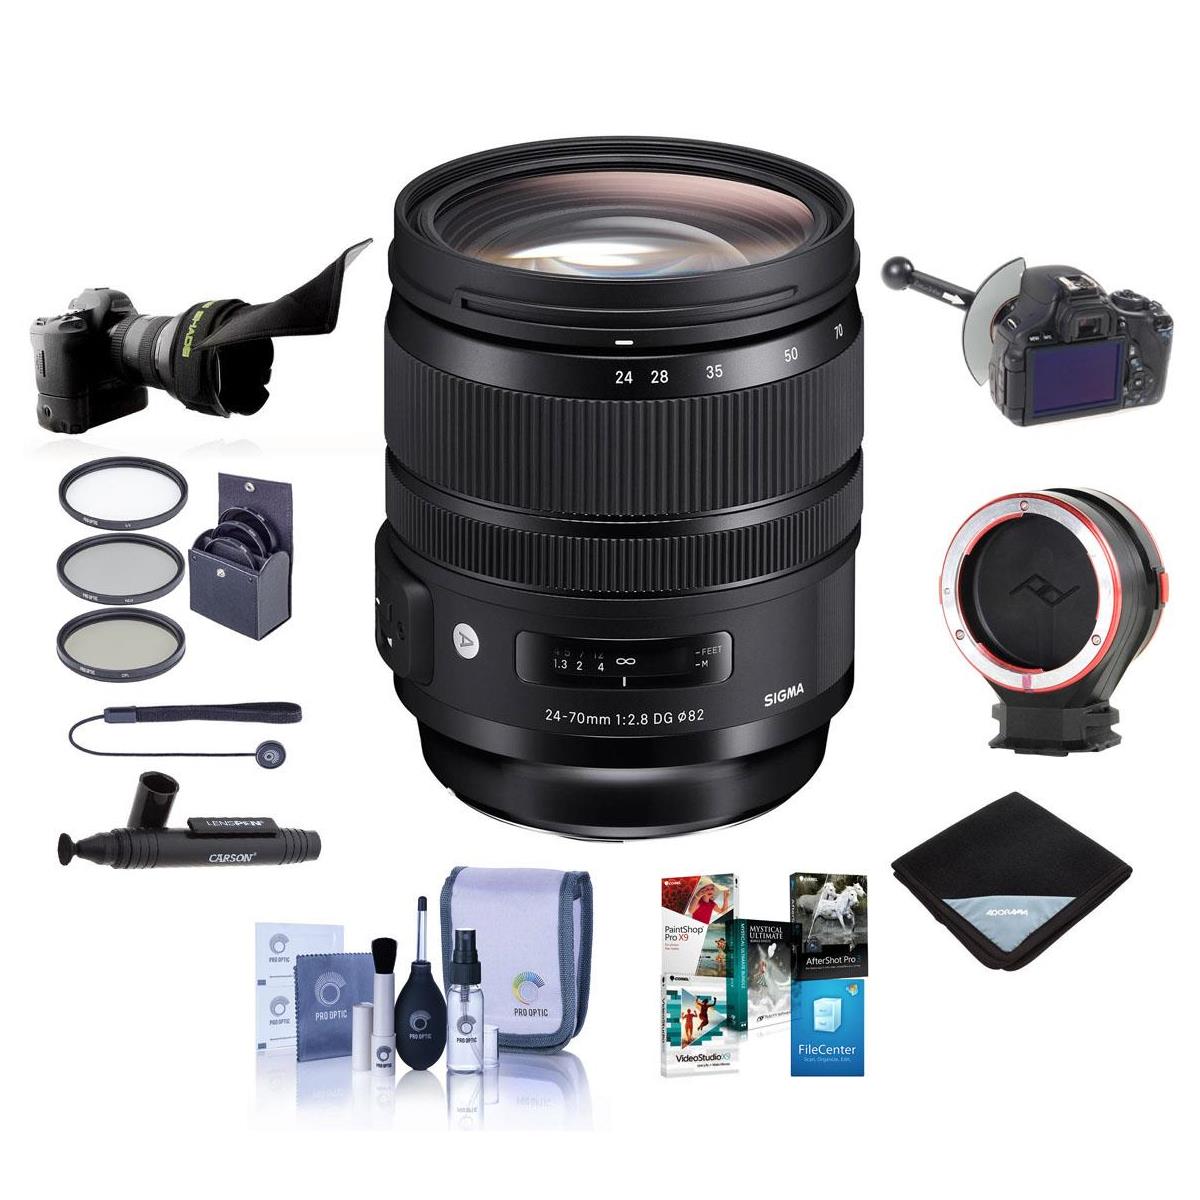 

Sigma 24-70mm f/2.8 DG OS HSM IF ART Lens for Canon EF w/Premium Accessories Kit